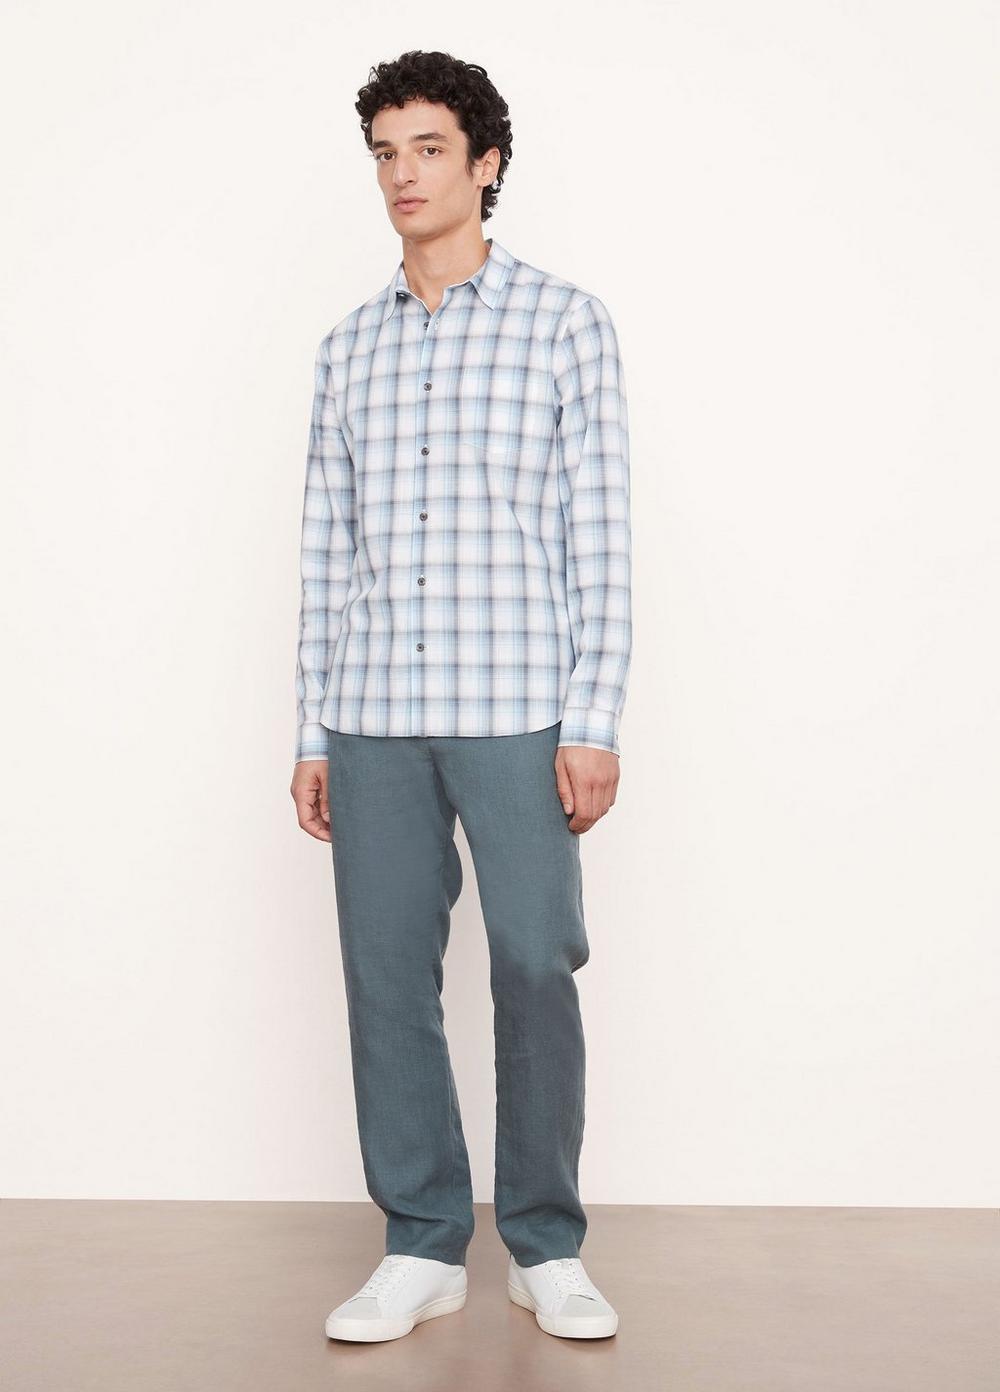 Vince M | Atwater Plaid Long Sleeve Shirt in Light Delft | Vince Unfold